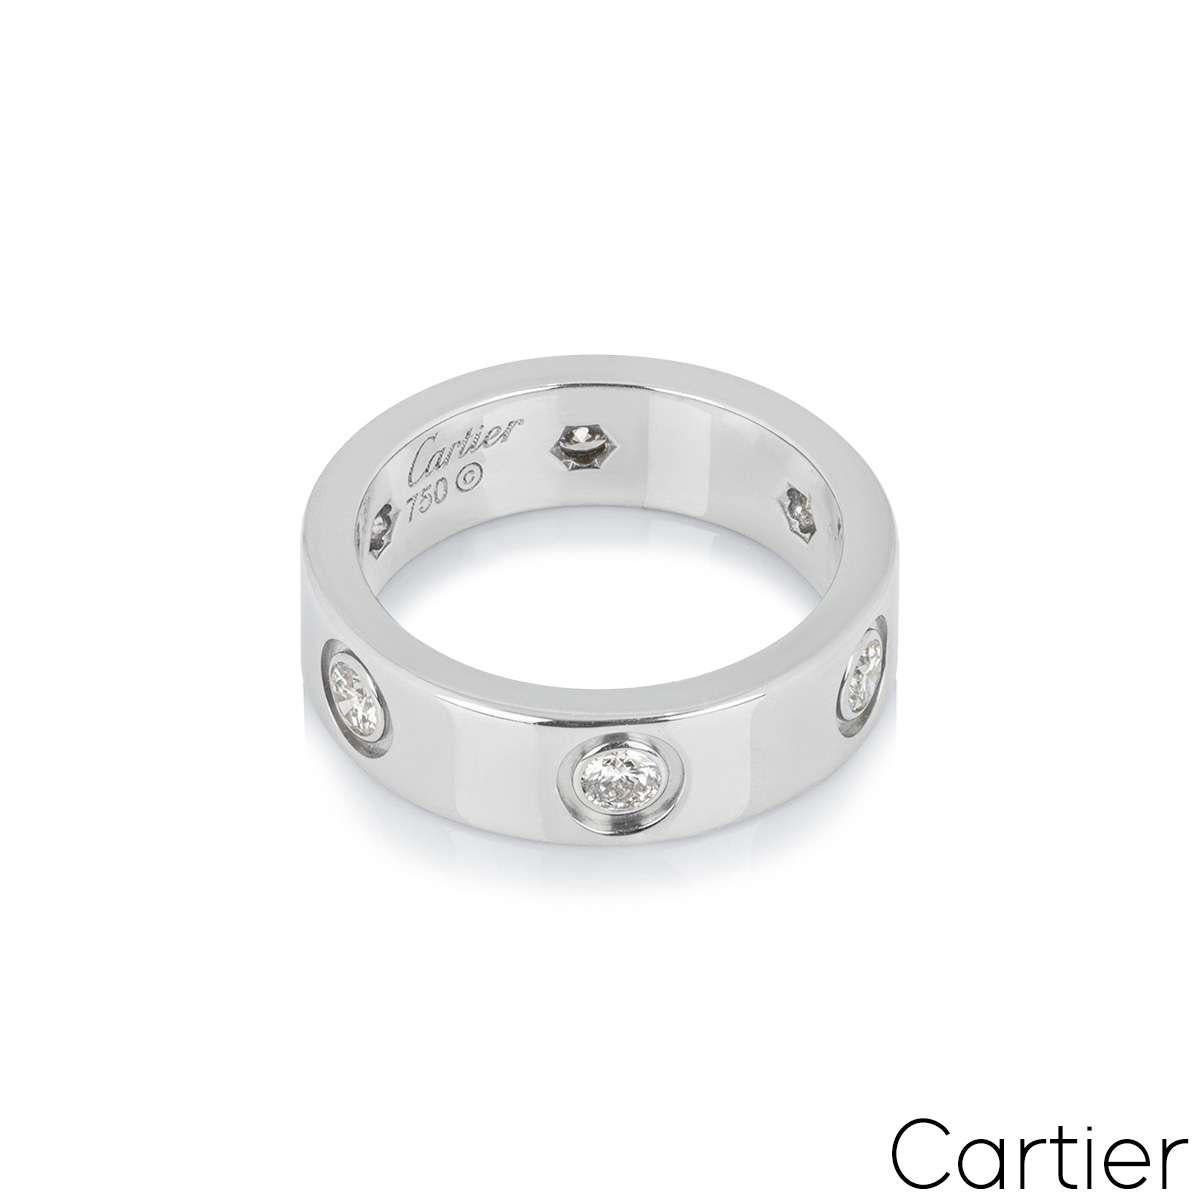 Cartier White Gold Full Diamond Love Ring Size 51 B4026000 In Excellent Condition For Sale In London, GB